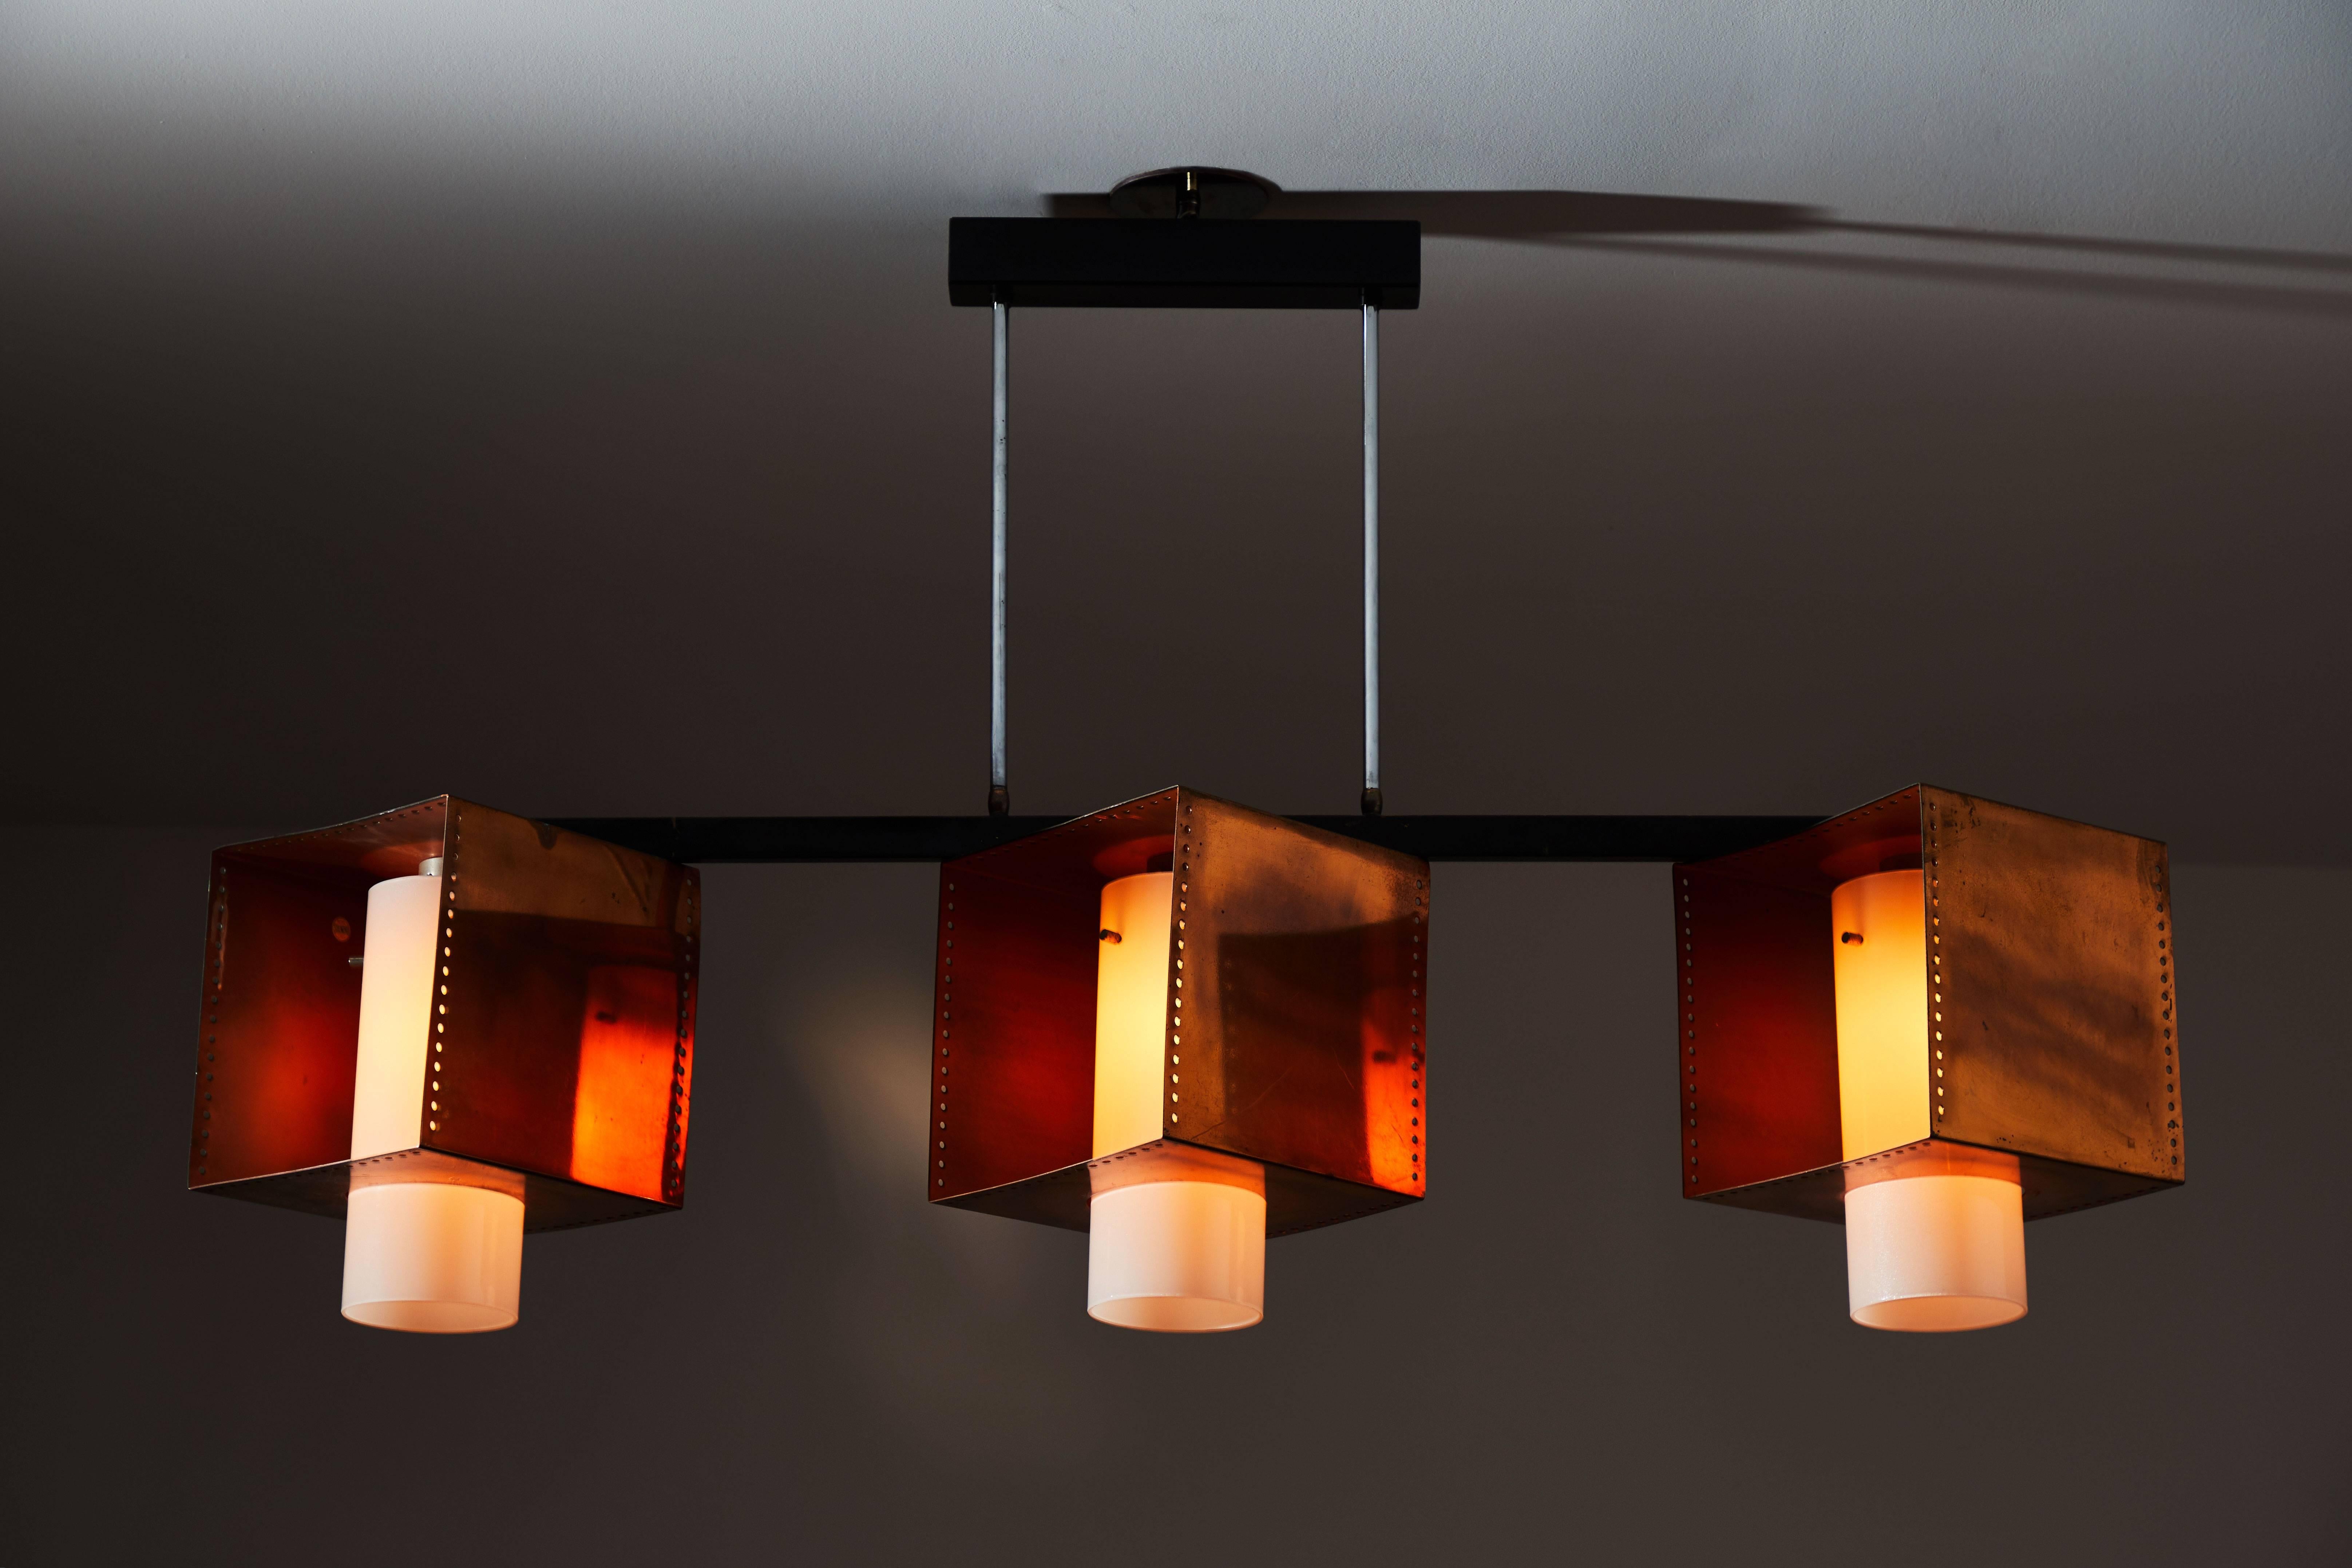 Rare three shade chandelier designed and manufactured by Stilnovo in Italy, circa 1960s. Copper-plated brass, brushed satin glass diffusers and enameled metal hardware. Rewired for US junction boxes. Each shade takes one E27 60w maximum bulb. Each